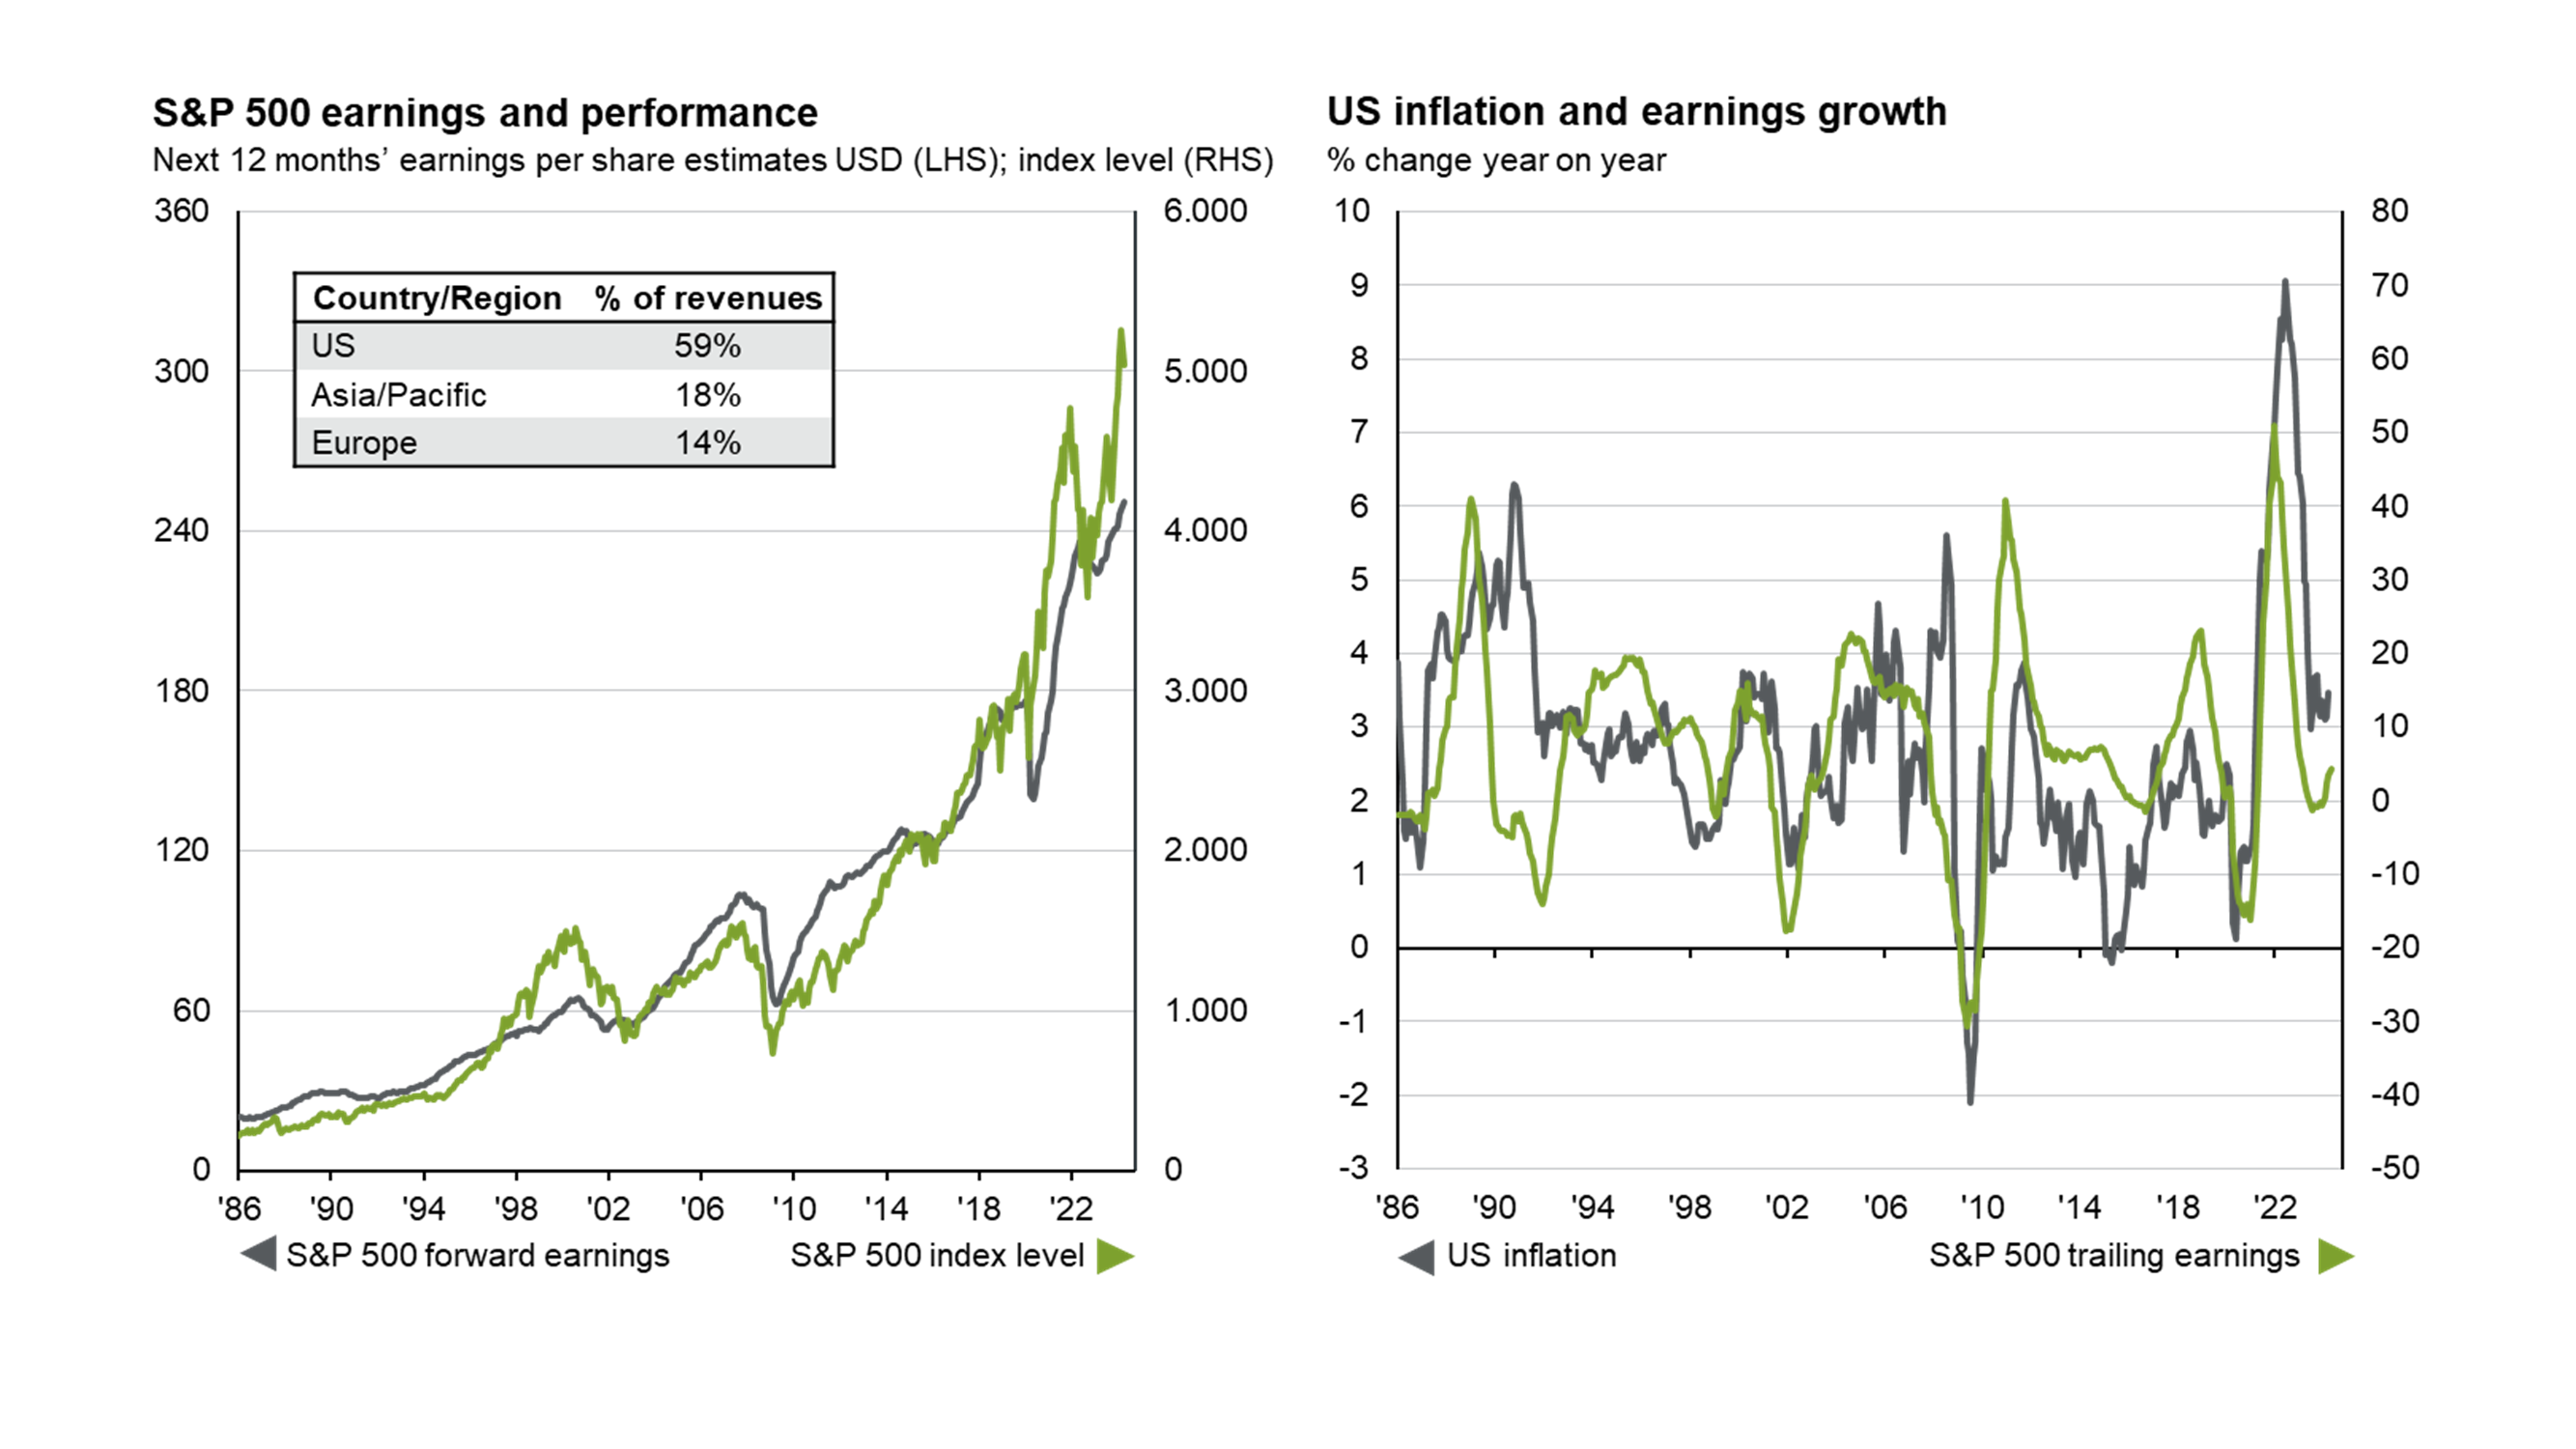 US equity valuations 